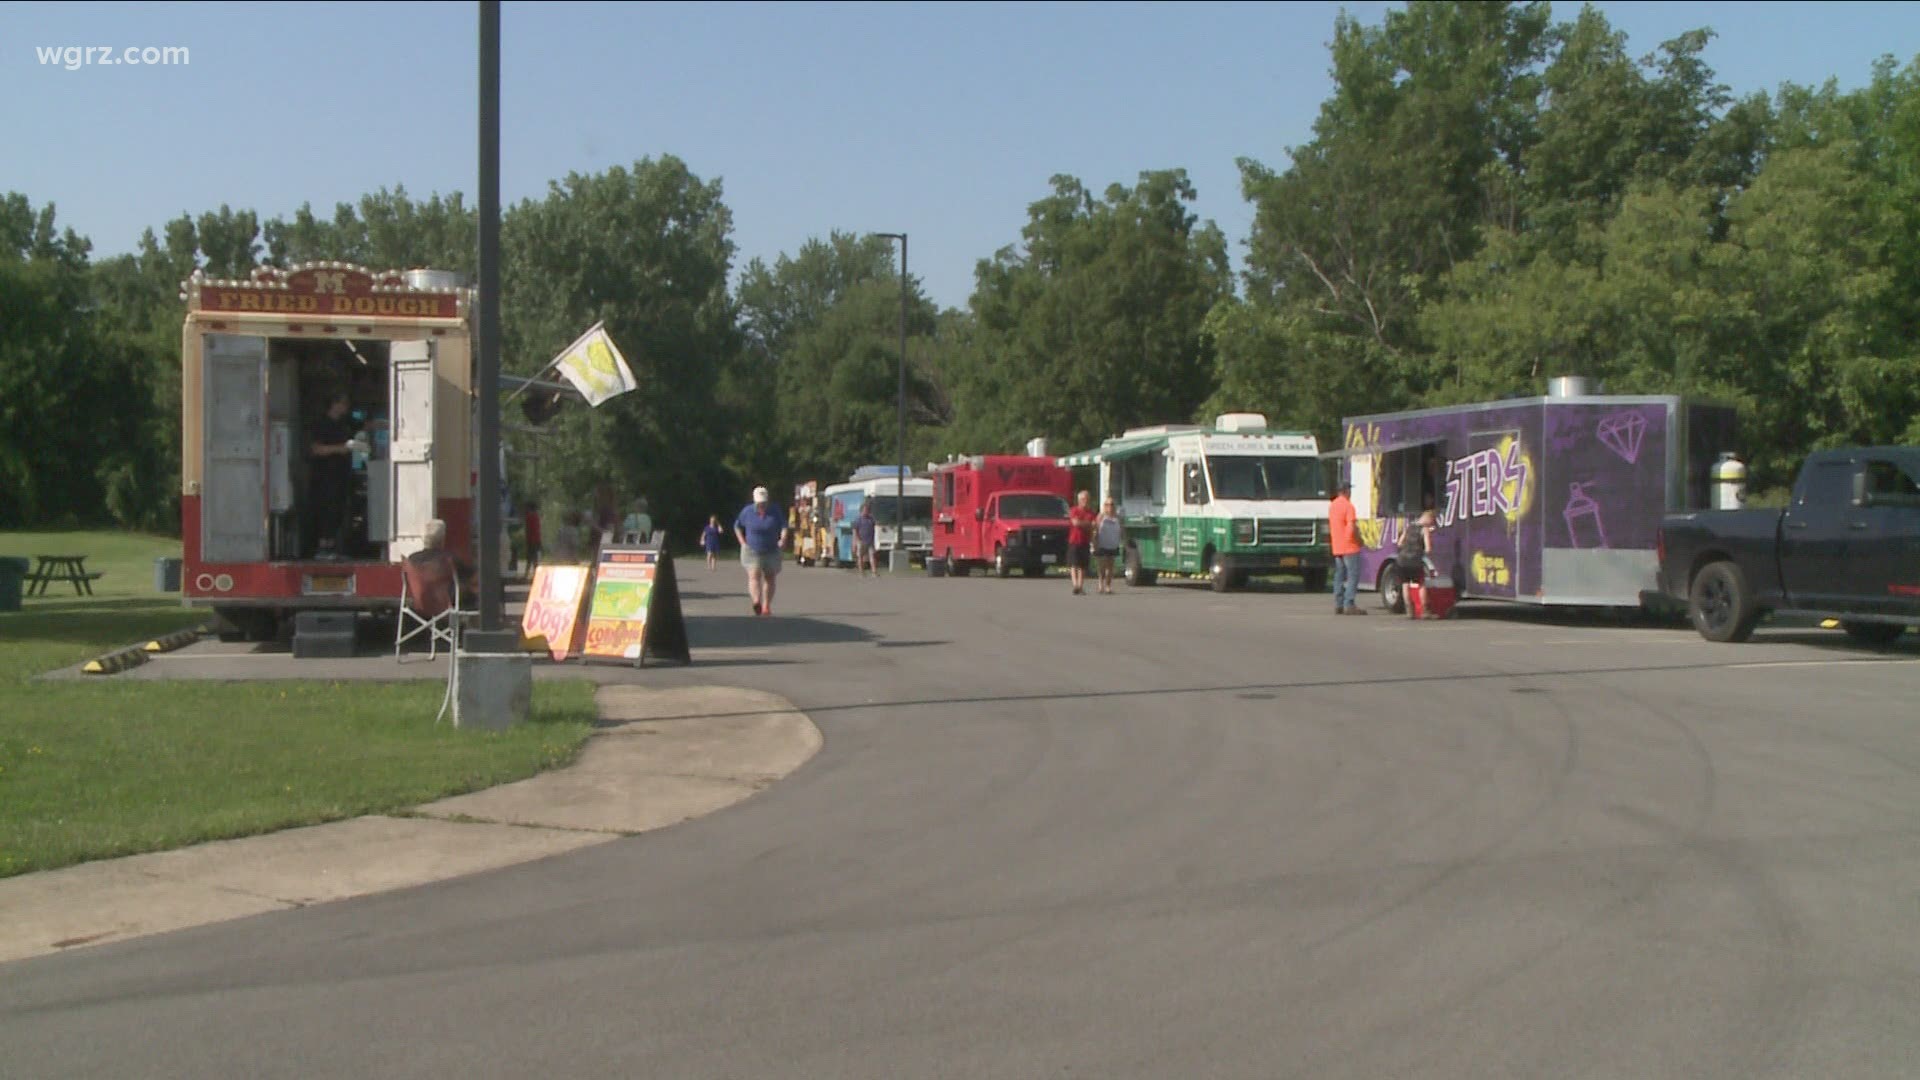 A popular Northtowns event is back for the summer.